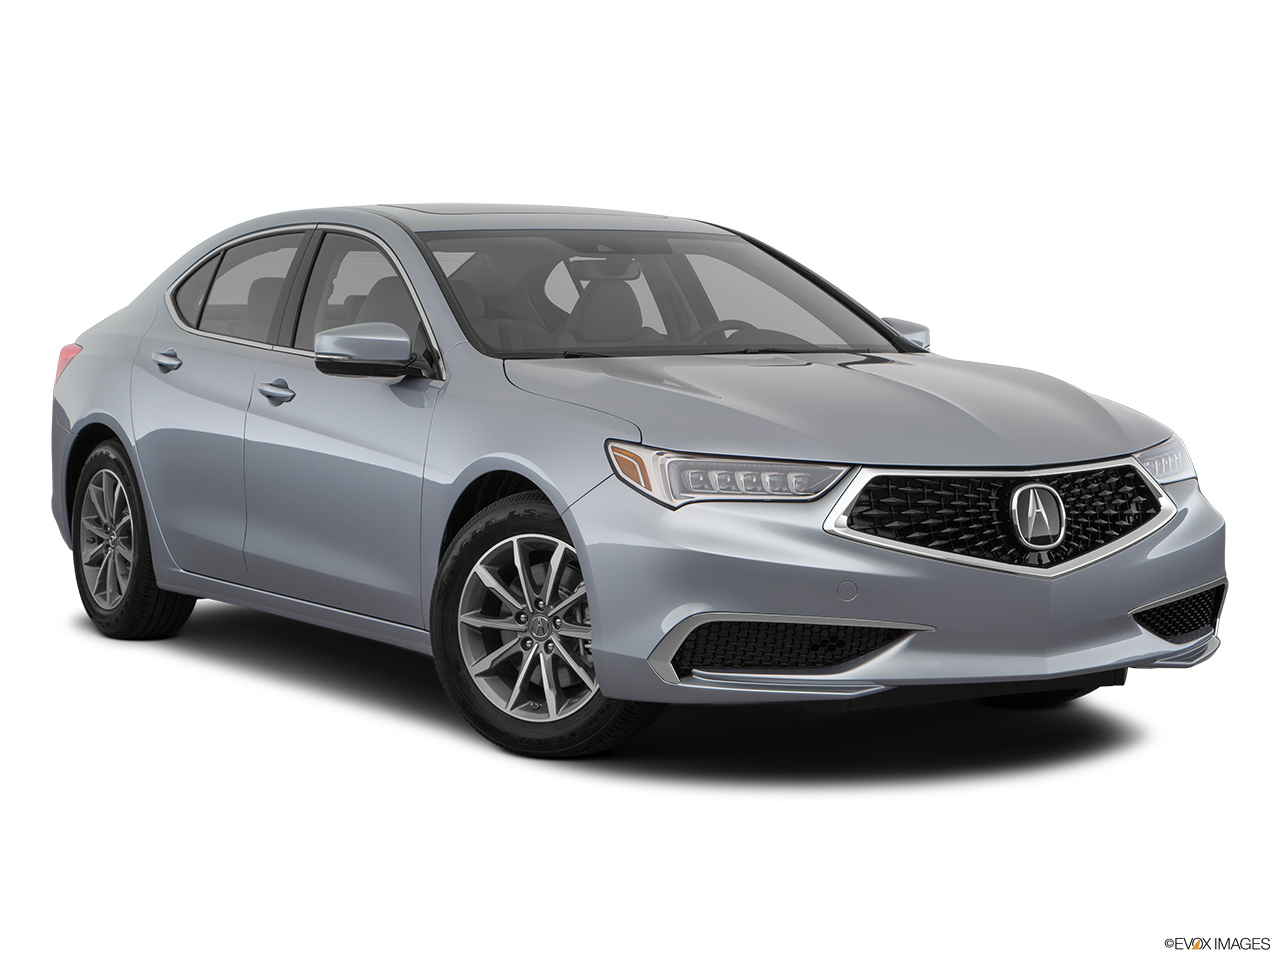 2020 Acura TLX 2.4 8-DCT P-AWS Front passenger 3/4 w/ wheels turned. 